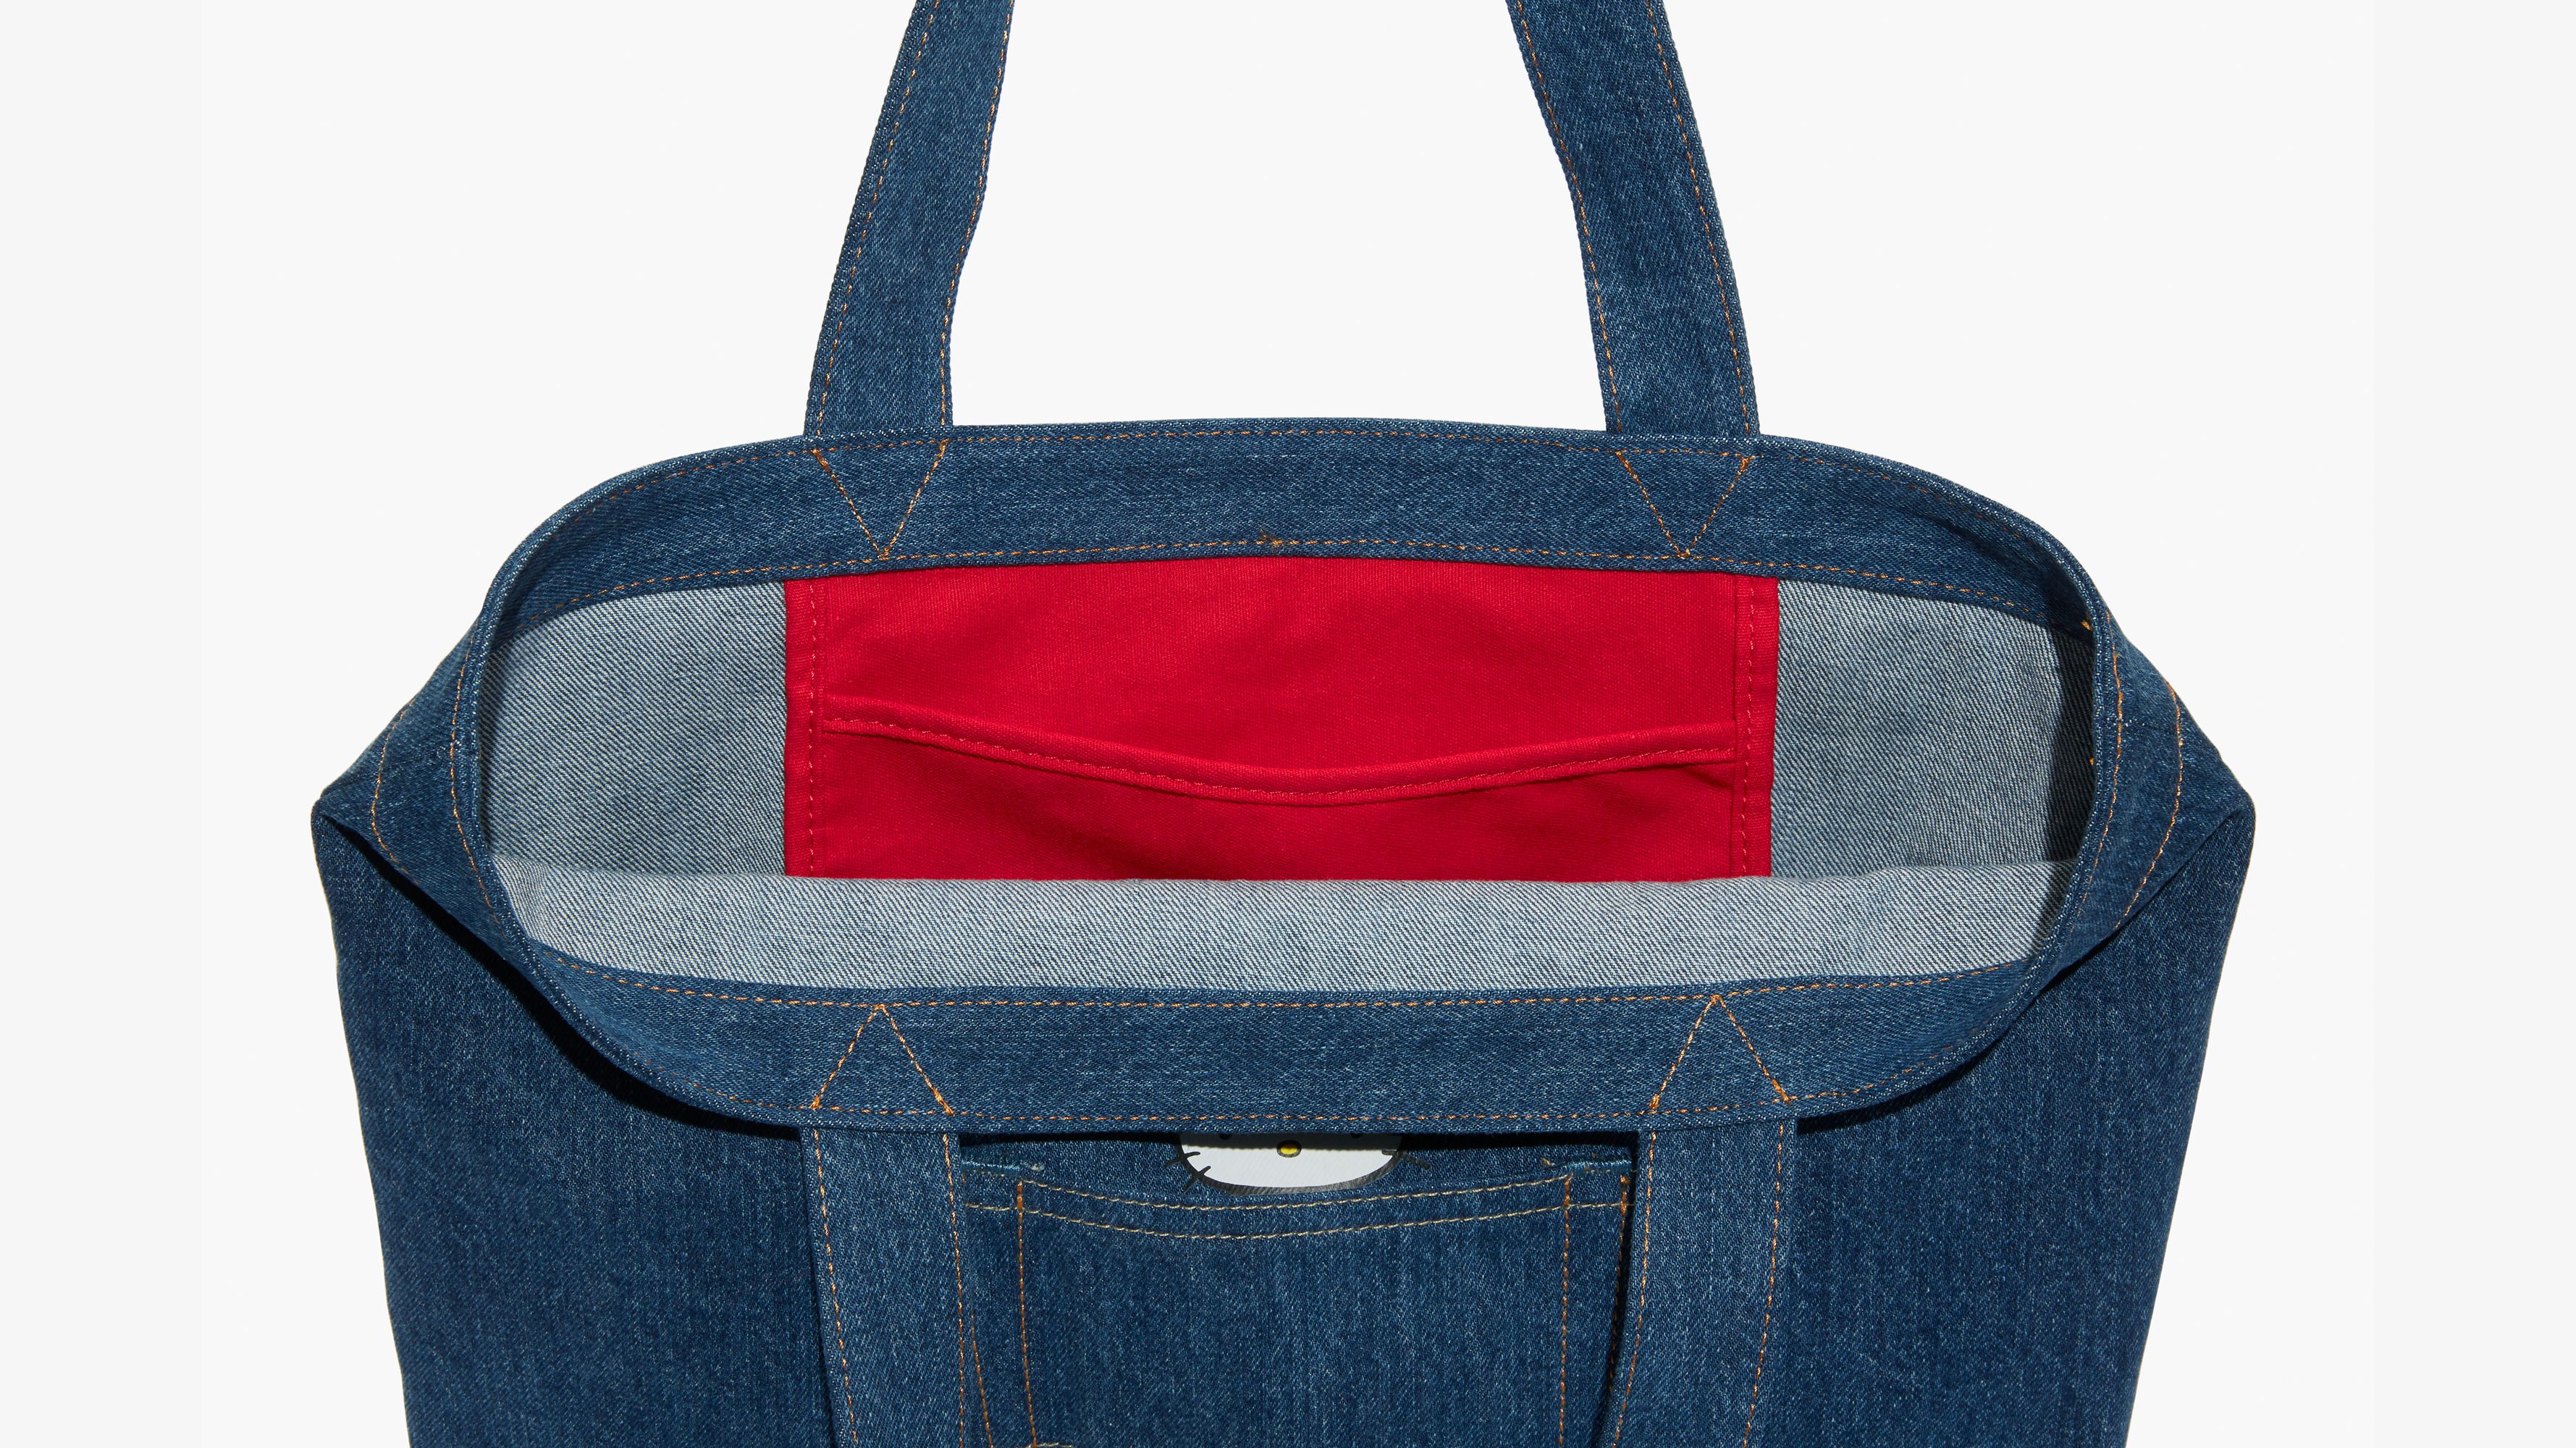 levis hello kitty tote bag